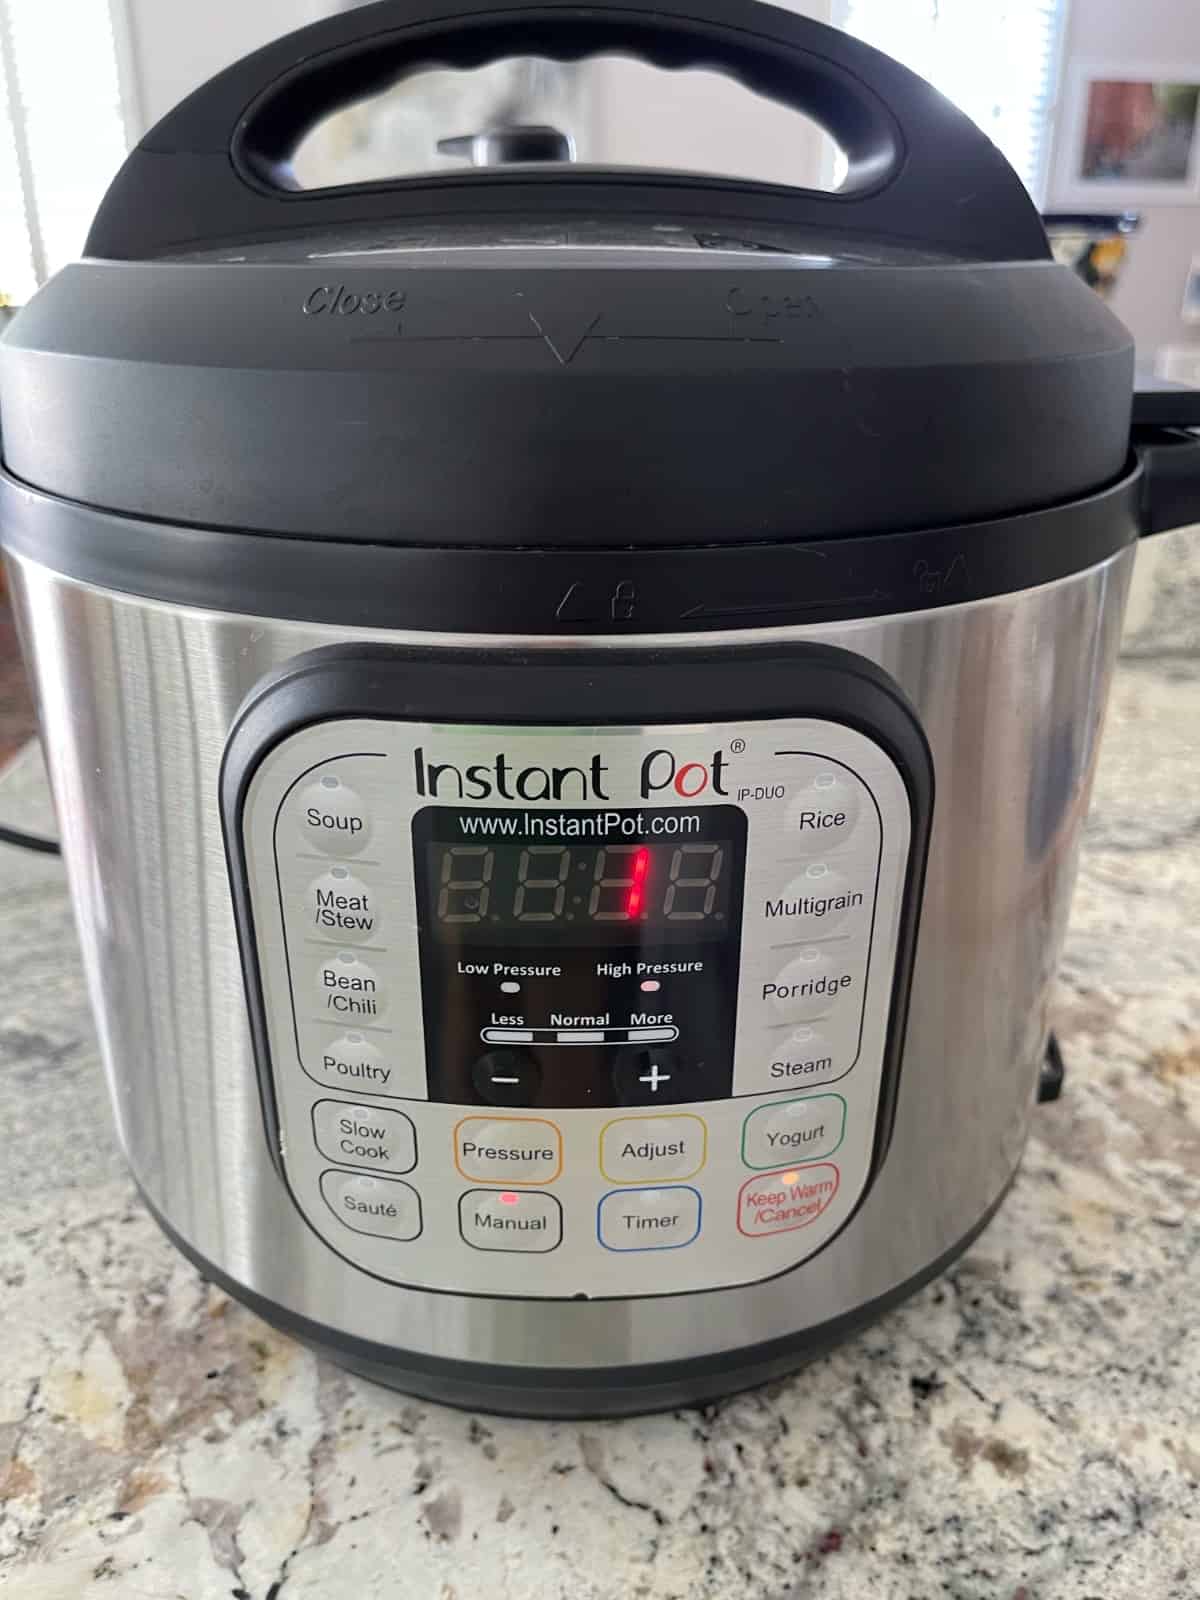 InstantPot cooking 1 minute on High pressure